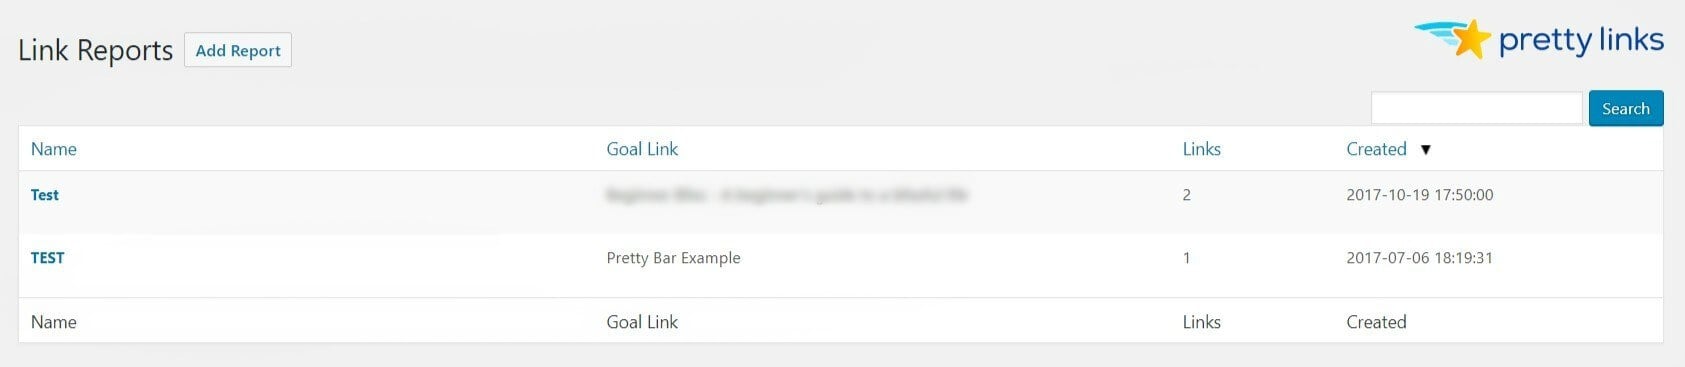 Pretty Links' Add a Report page for link tracking